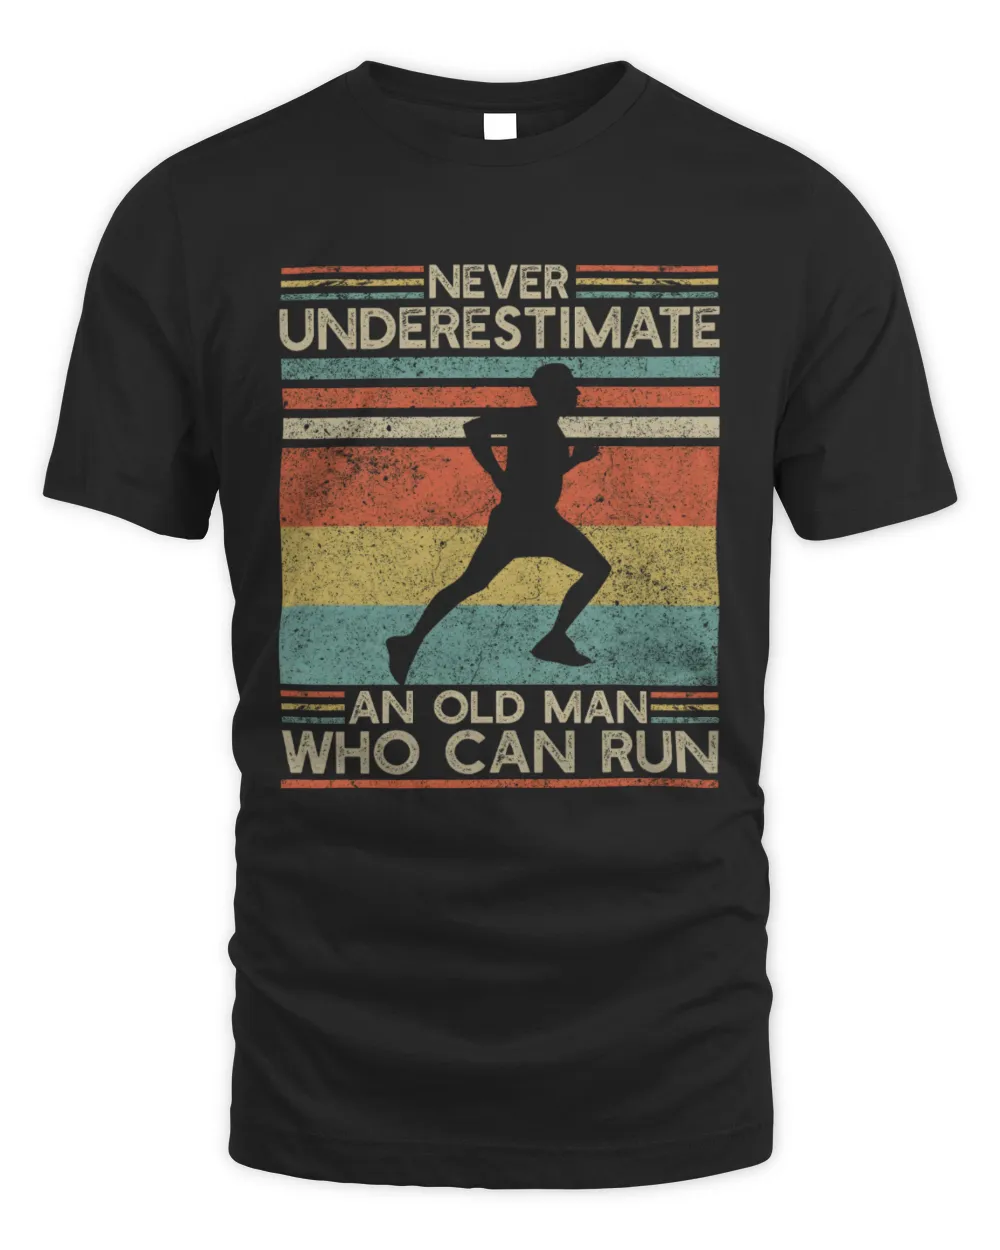 Never Underestimate an Old Man Who Can Run, Running T-shirt for Dad, Runner Dad Father's Day Gift, Marathon Run Clothes, Running Grandpa Shirt